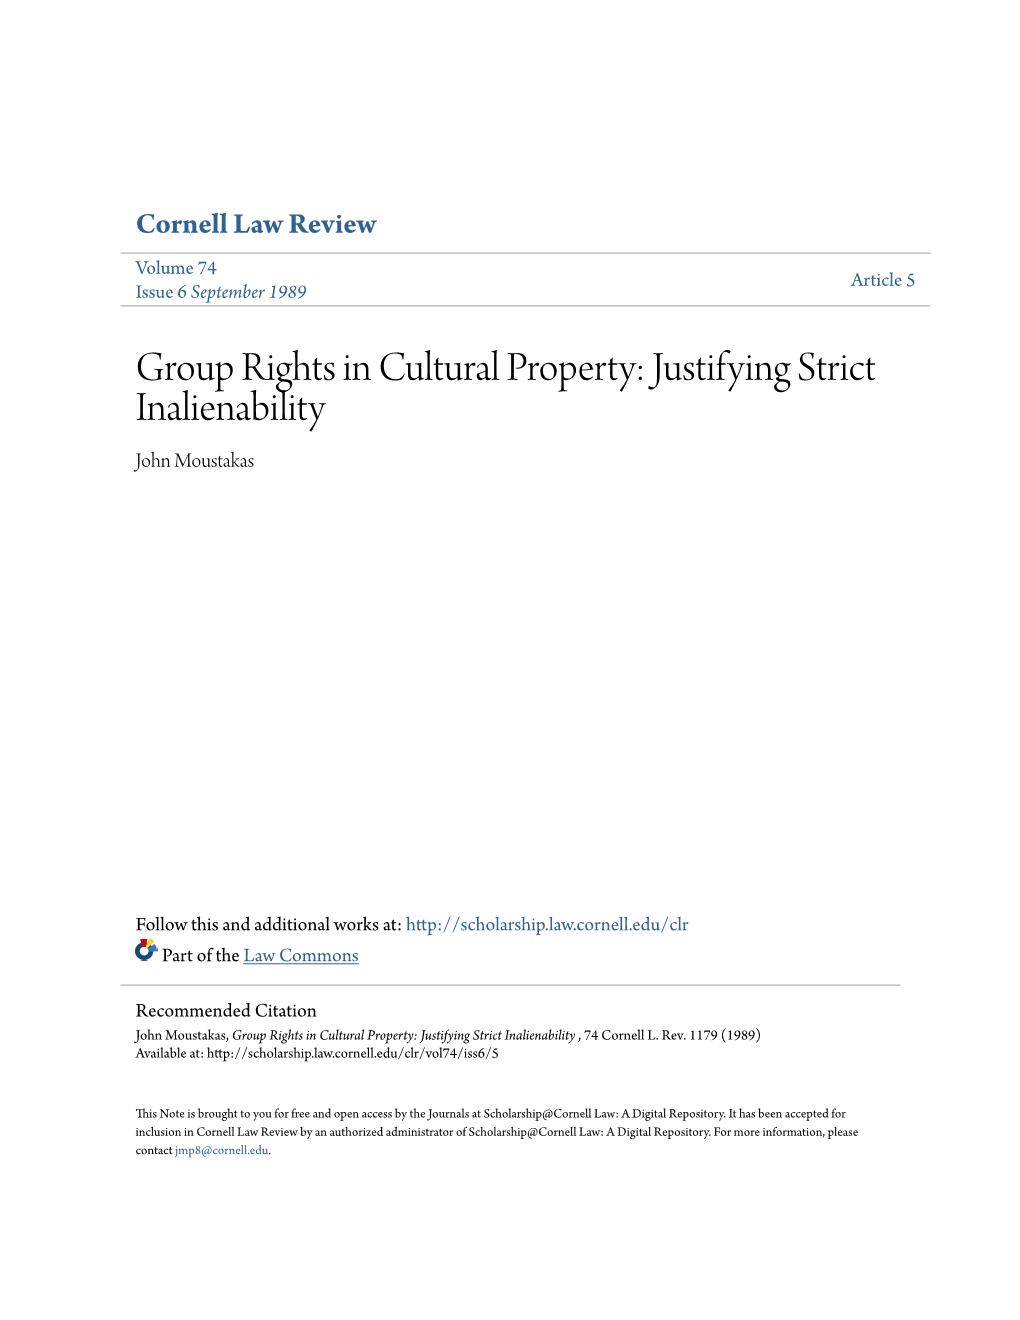 Group Rights in Cultural Property: Justifying Strict Inalienability John Moustakas